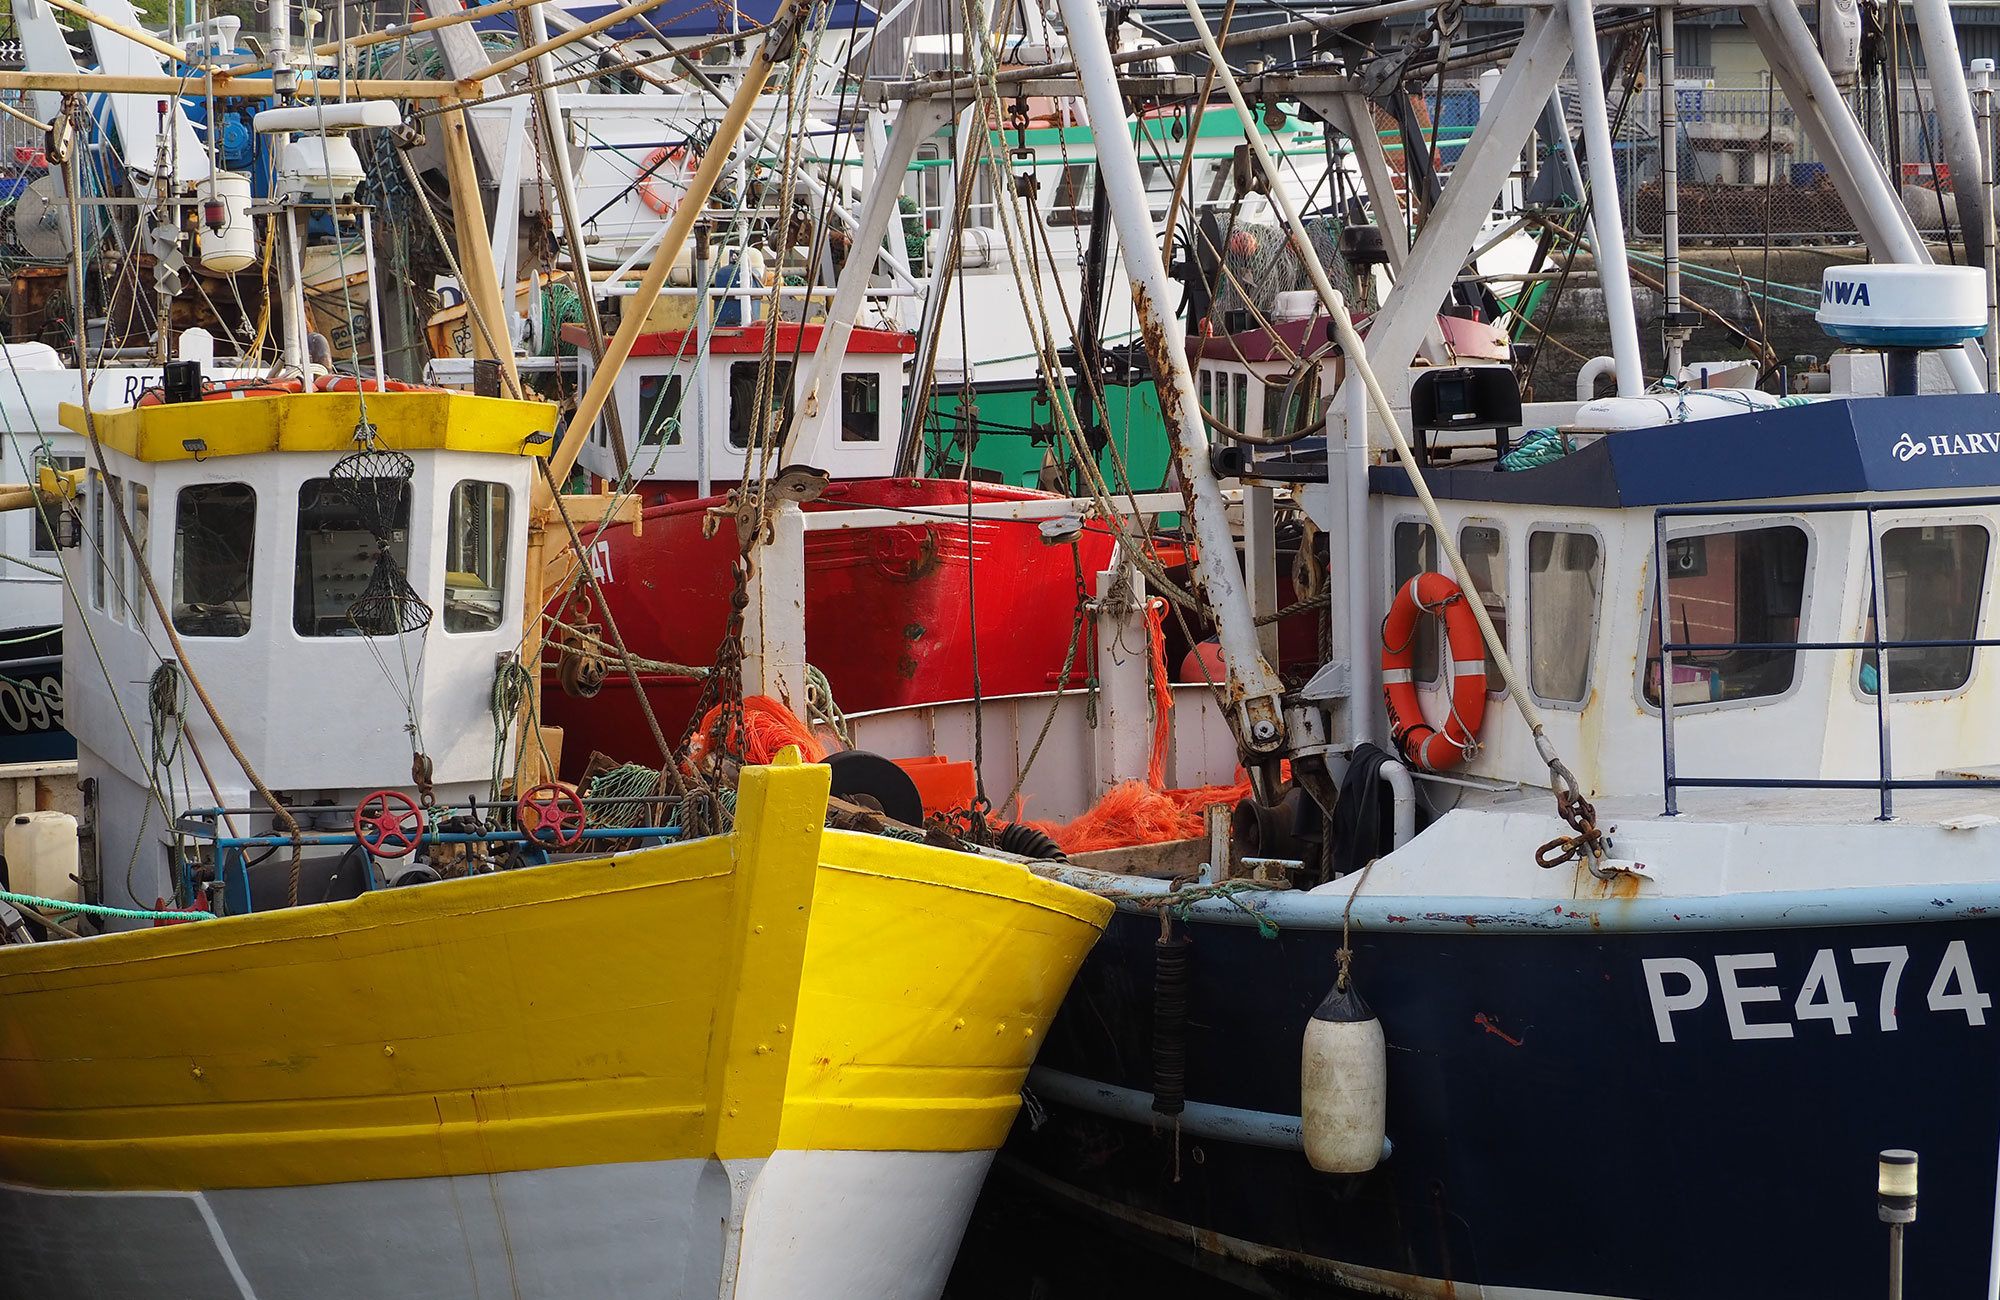 Fishing boats in Looe harbour, Cornwall, UK. Photograph: Peter Miller